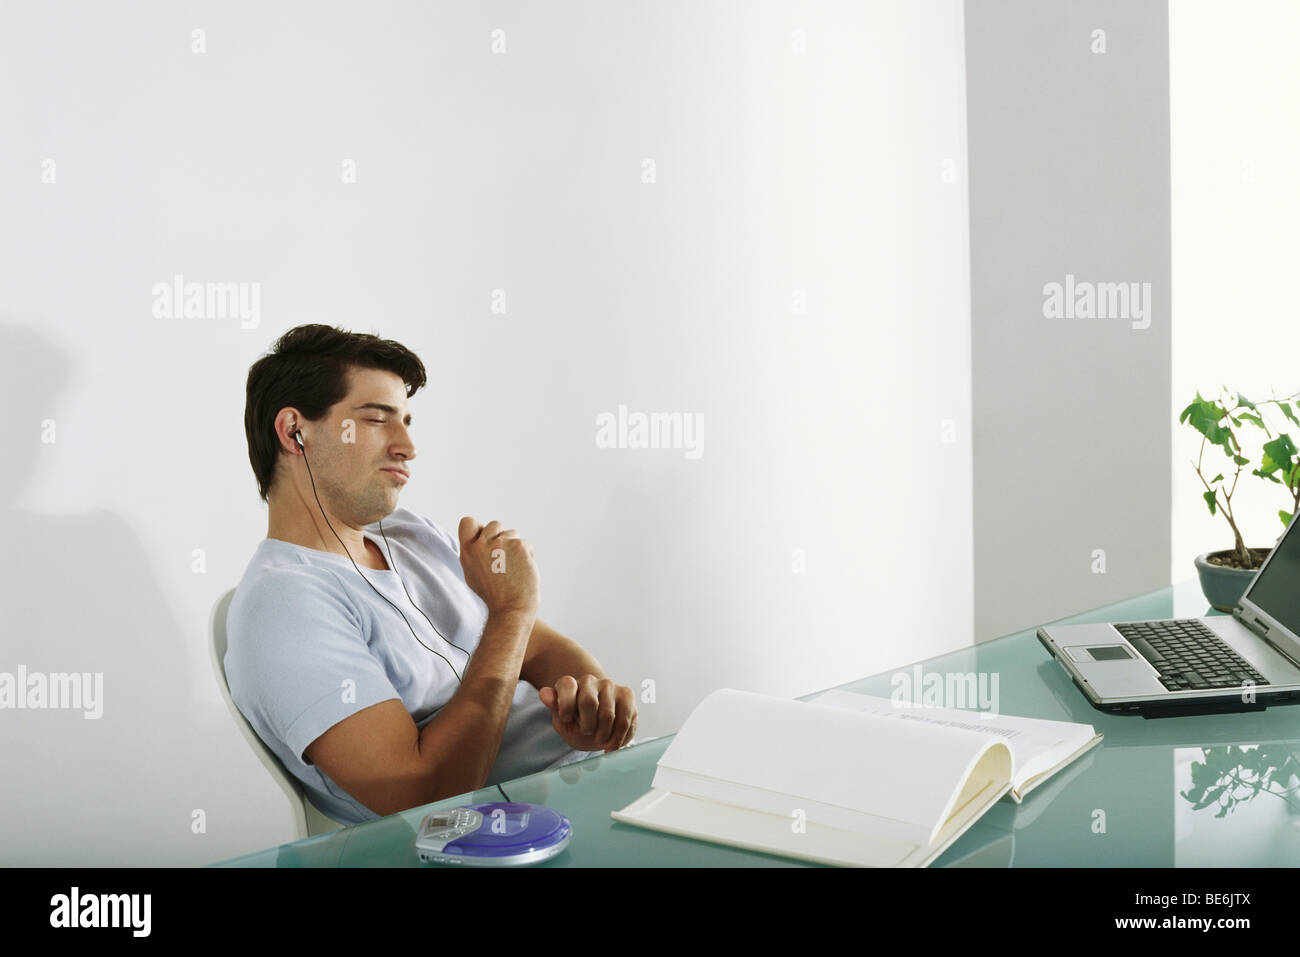 Man at desk listening to music, pretending to play drums along with song Stock Photo